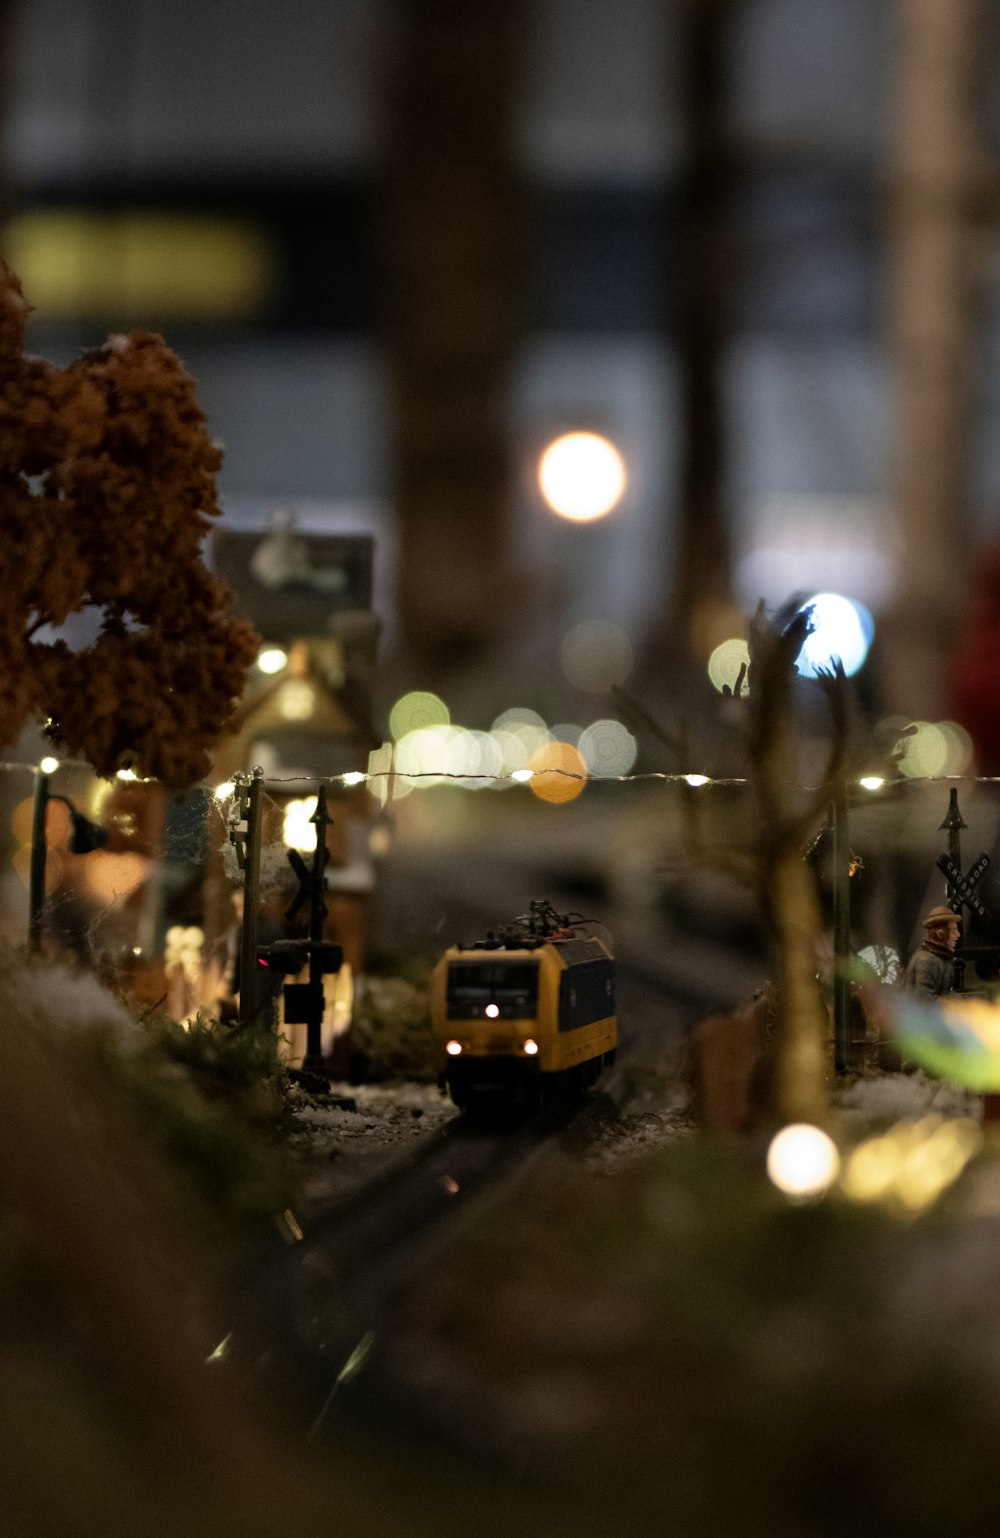 a model train set up on a track at night